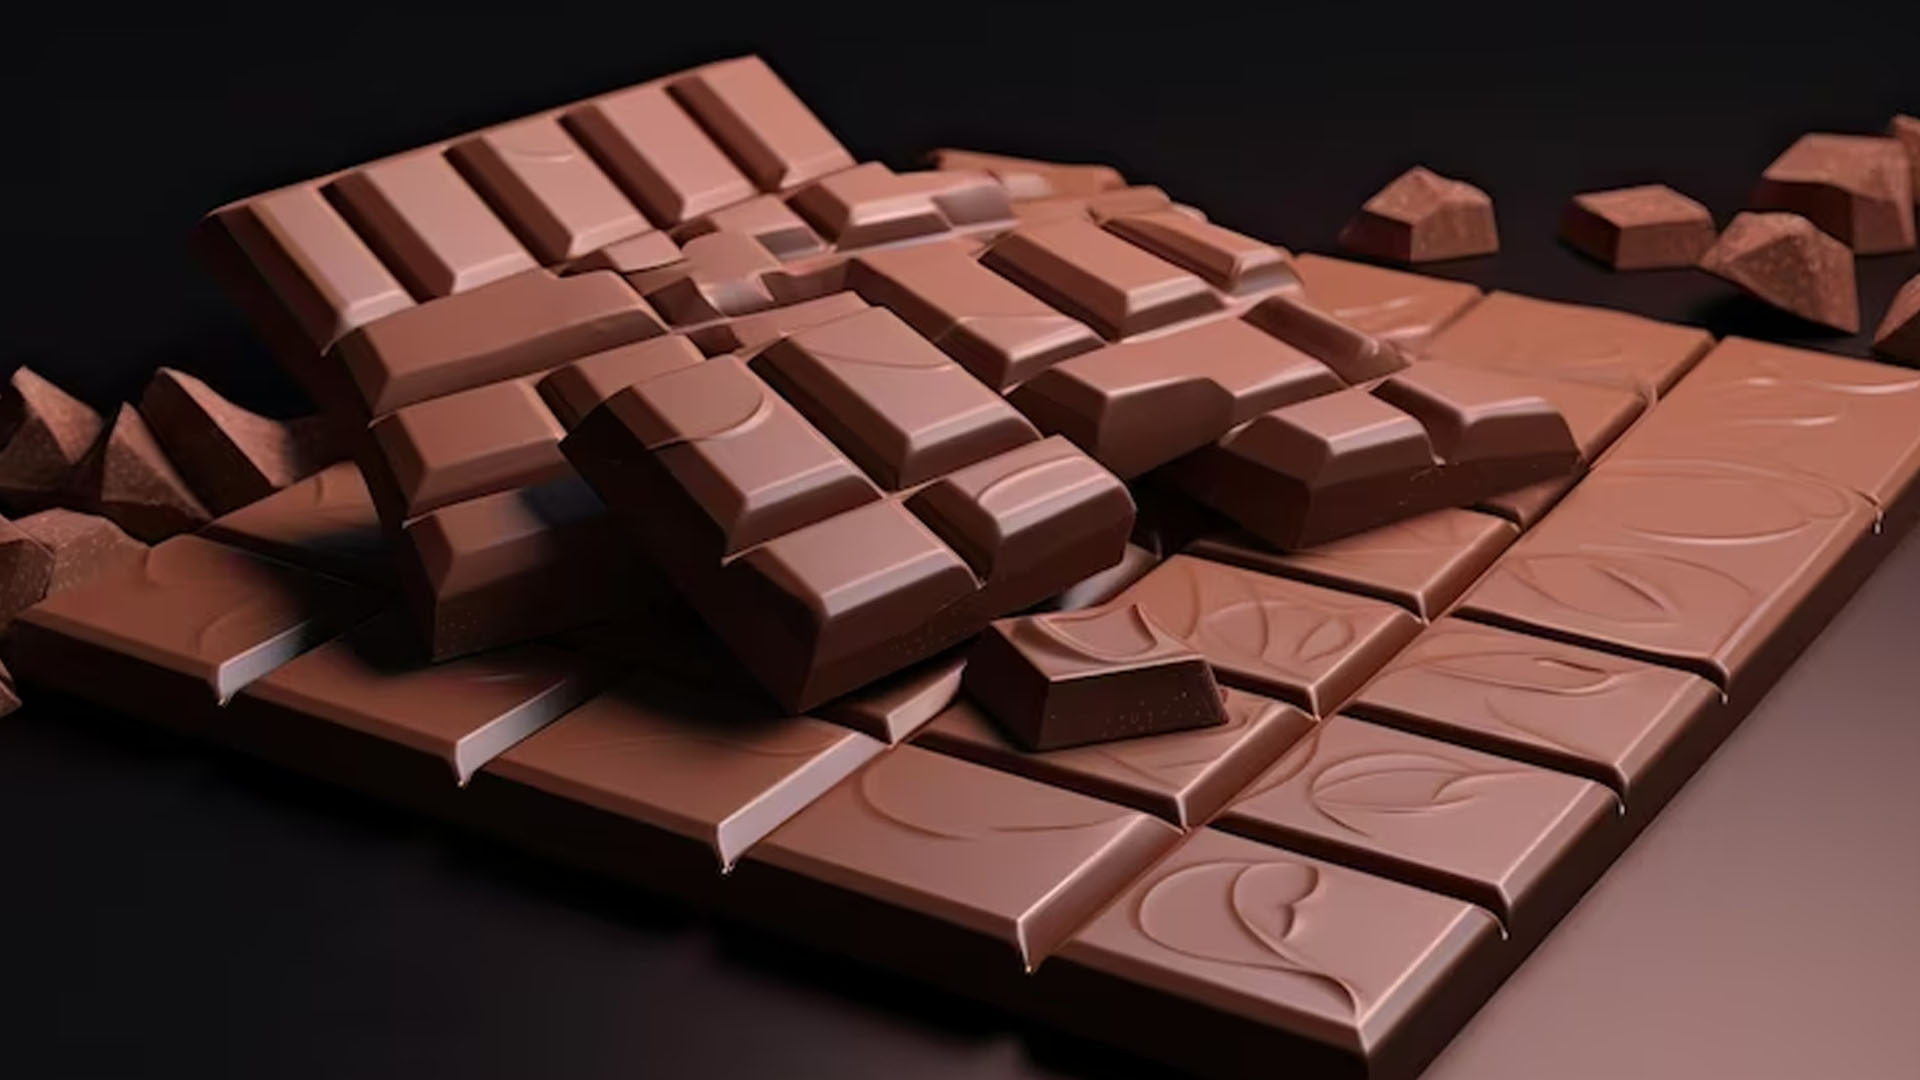 What Are The Health Benefits of Raw Chocolate?